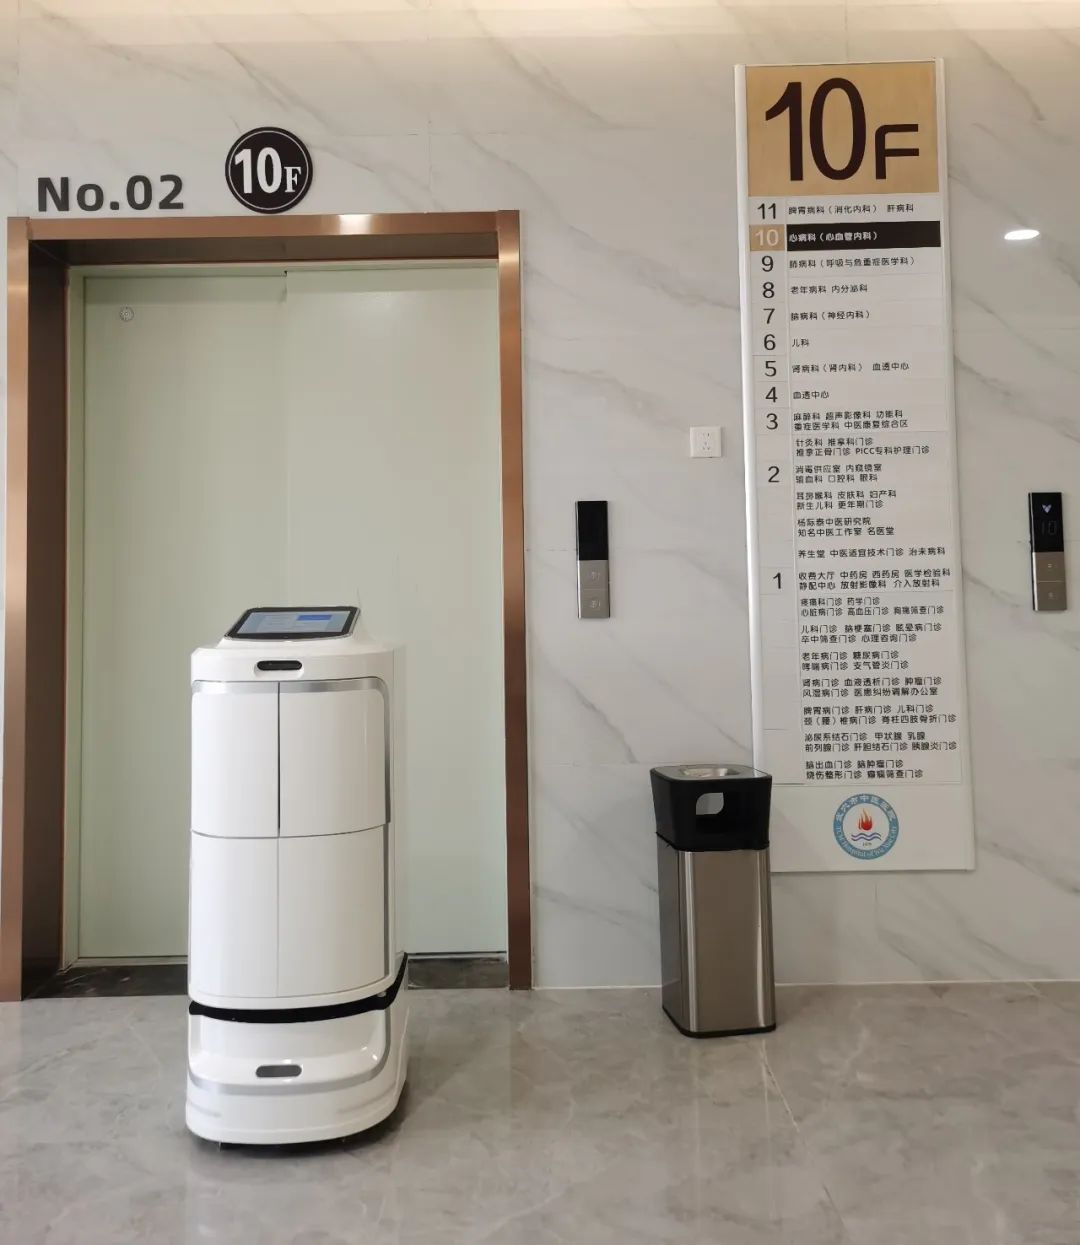 Innovative technology to help medical treatment: Alpha robotics three series of robots in the “Wuxue City Hospital of Traditional Chinese Medicine” application case!